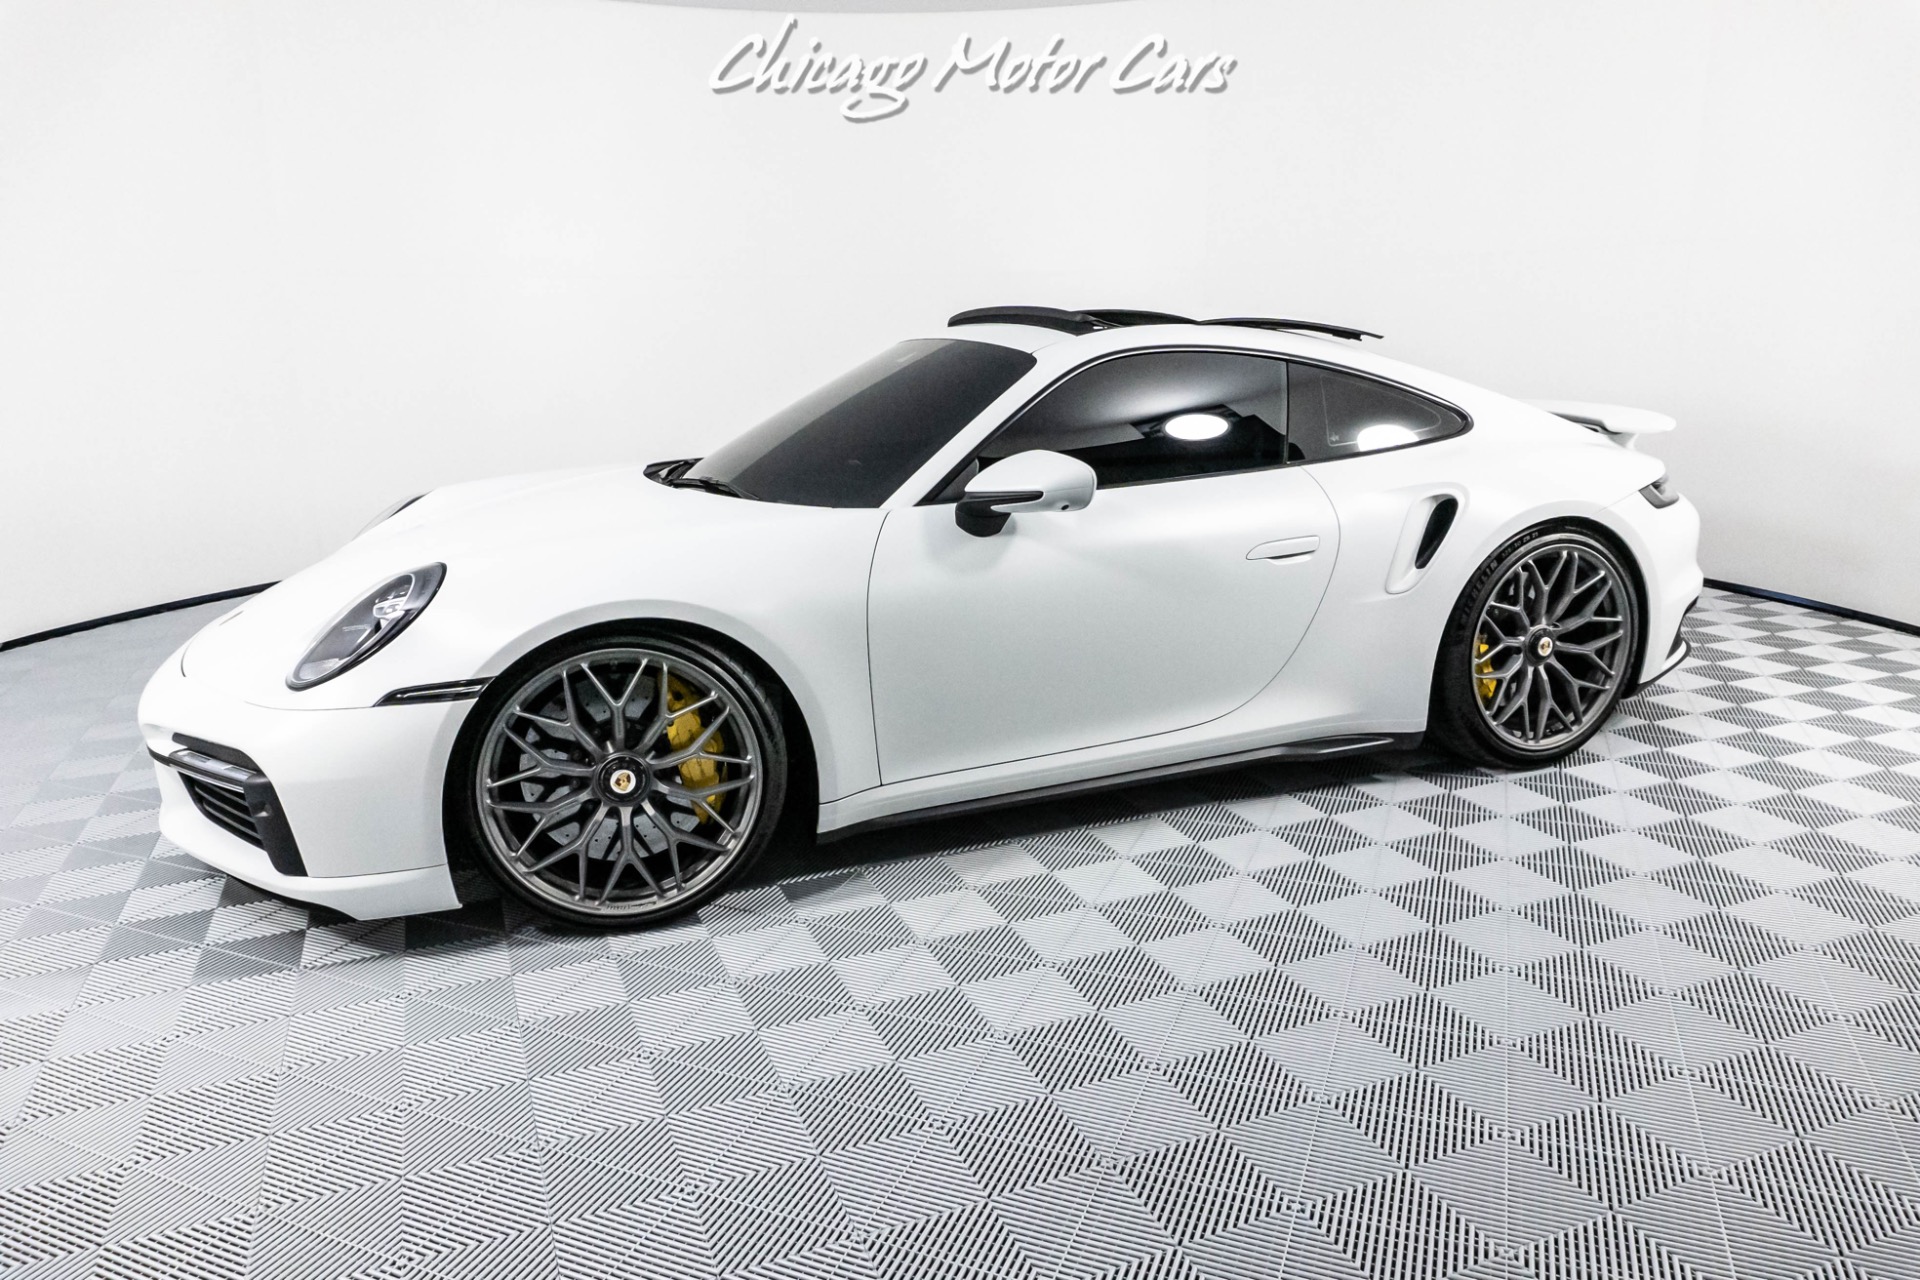 Used-2021-Porsche-911-Turbo-S-Only-6k-Miles-Burmester-Sound-Front-Lift-Sport-Exhaust